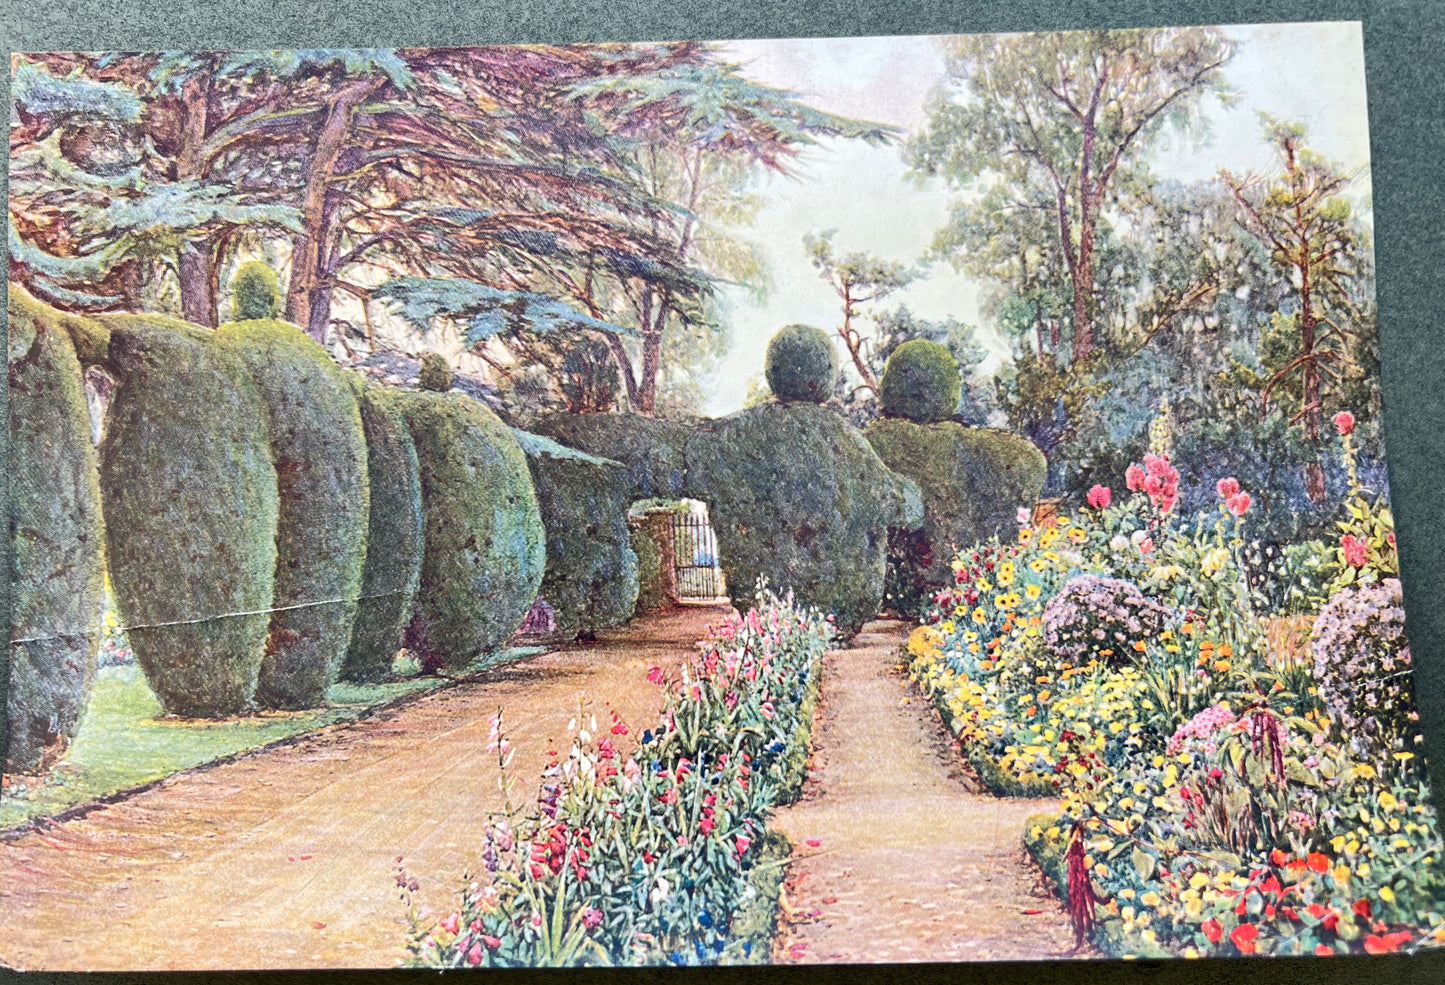 1908 Book THE GARDENS OF ENGLAND with 8 Lovely Colour Illustrations